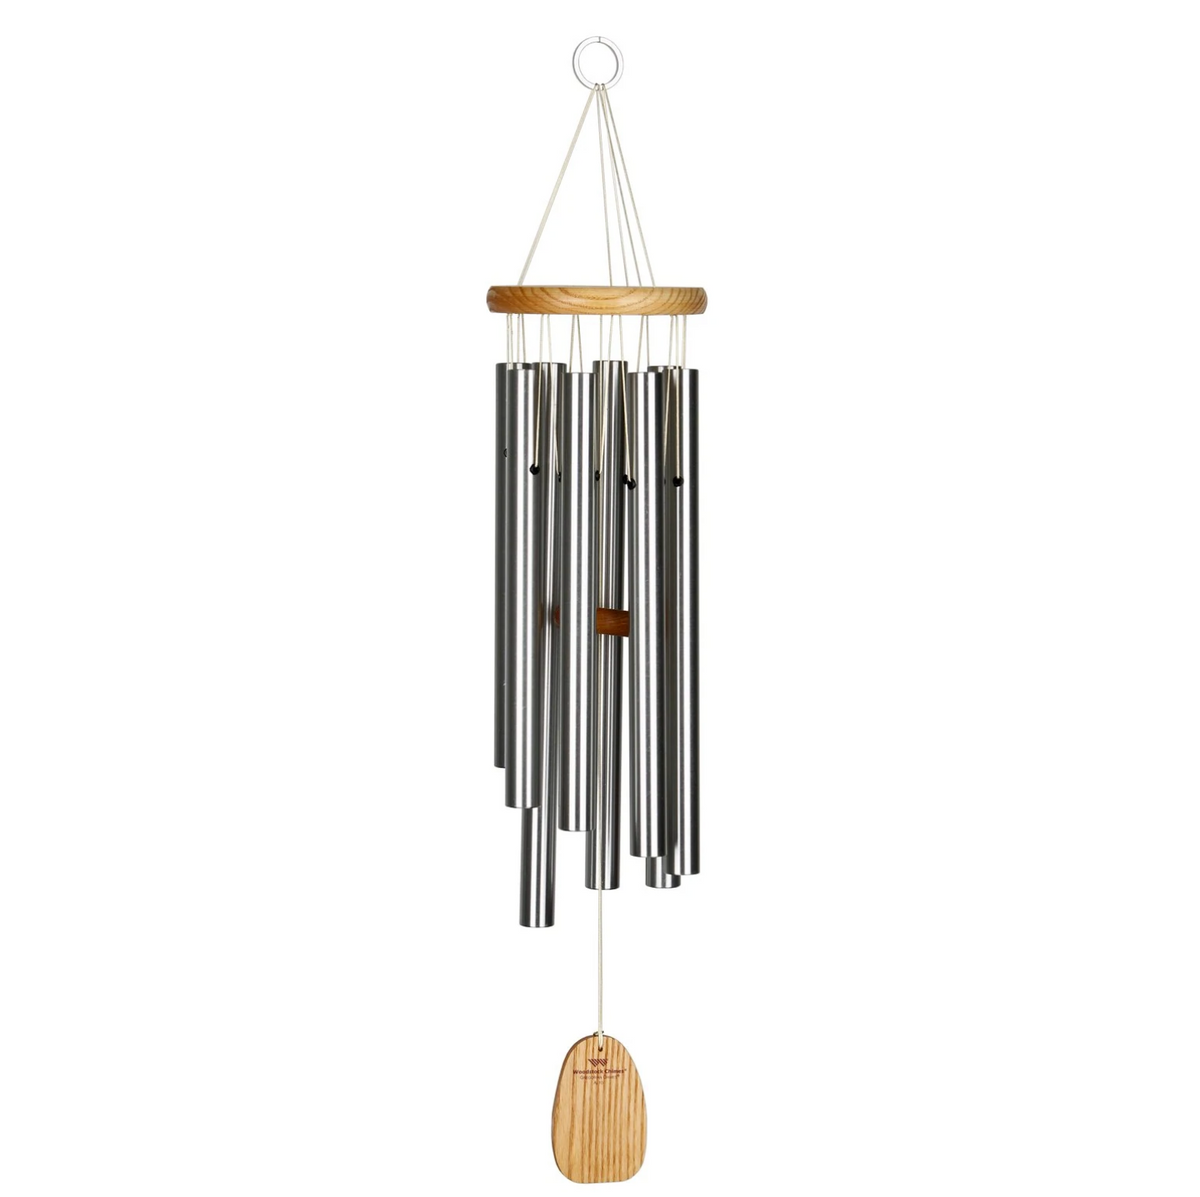 Woodstock Gregorian Chimes - Alto, Silver - Heart of the Home PA